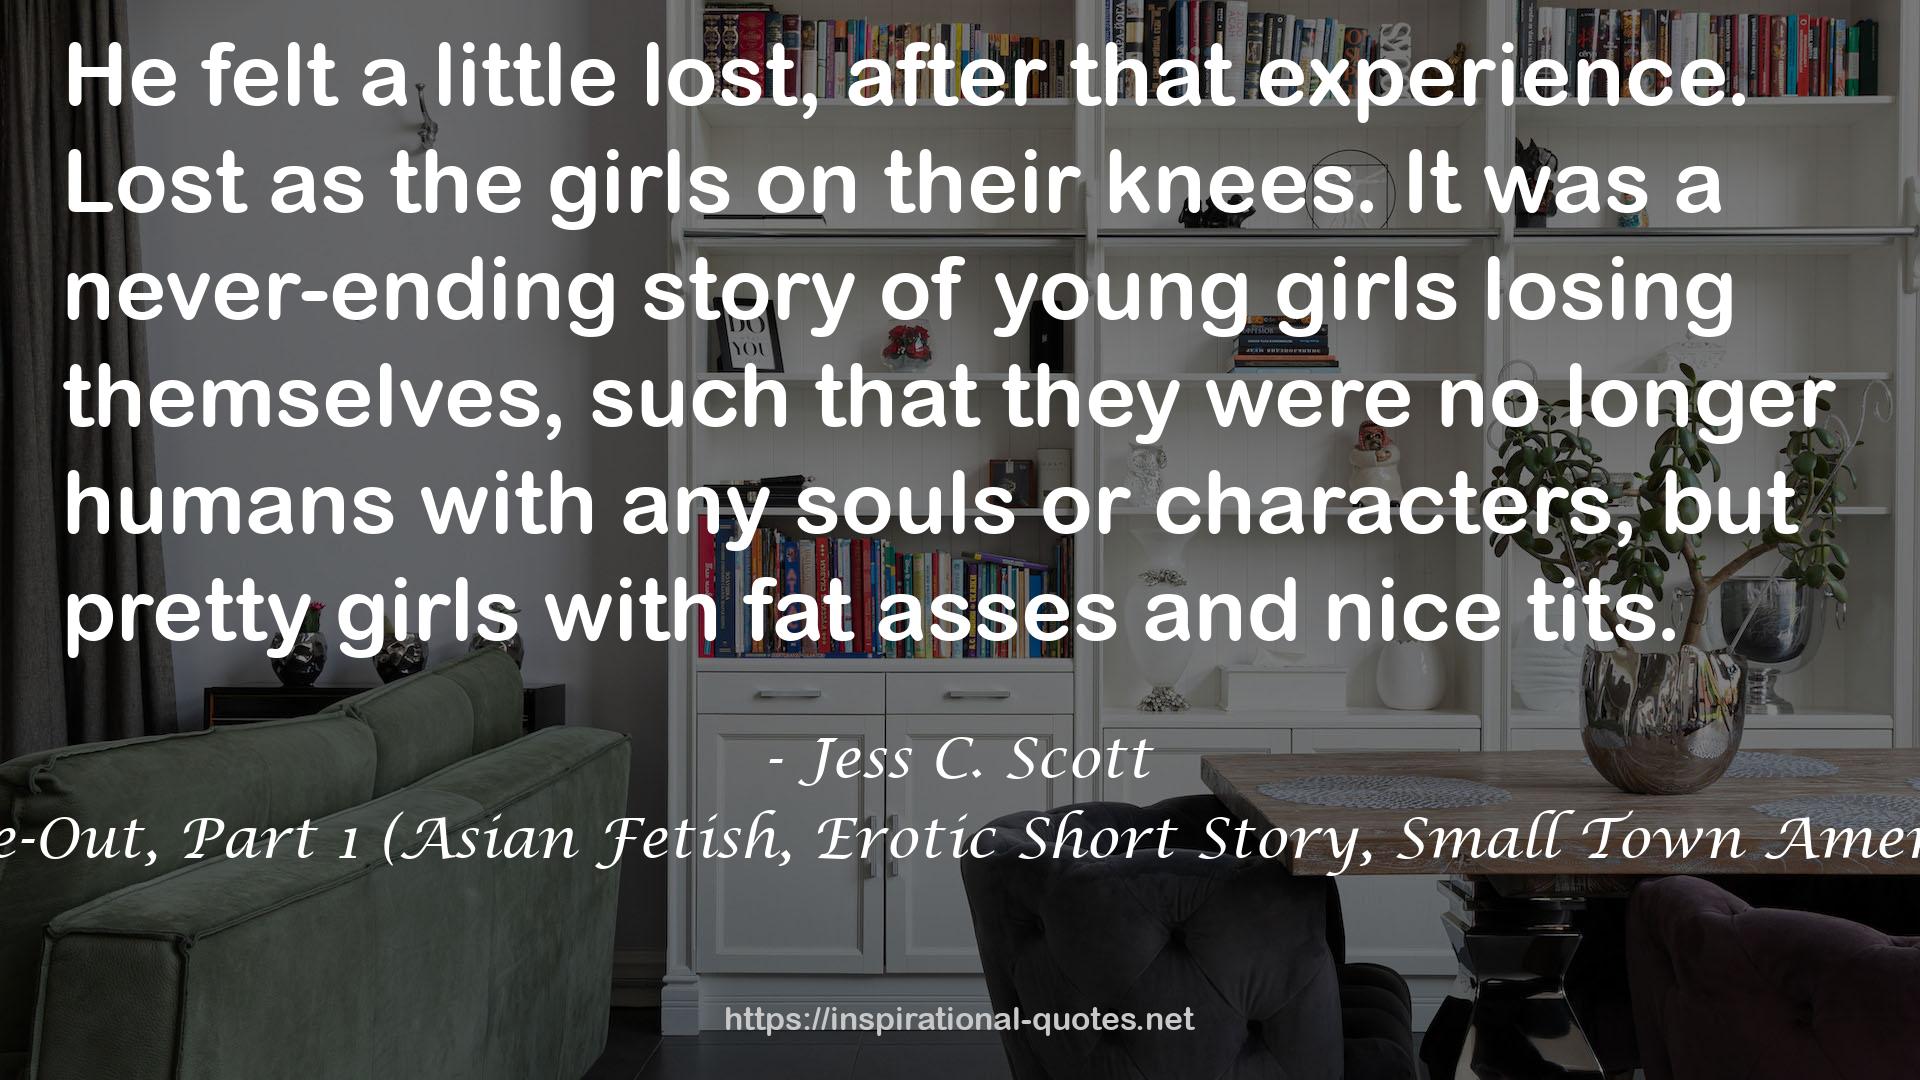 Take-Out, Part 1 (Asian Fetish, Erotic Short Story, Small Town America) QUOTES